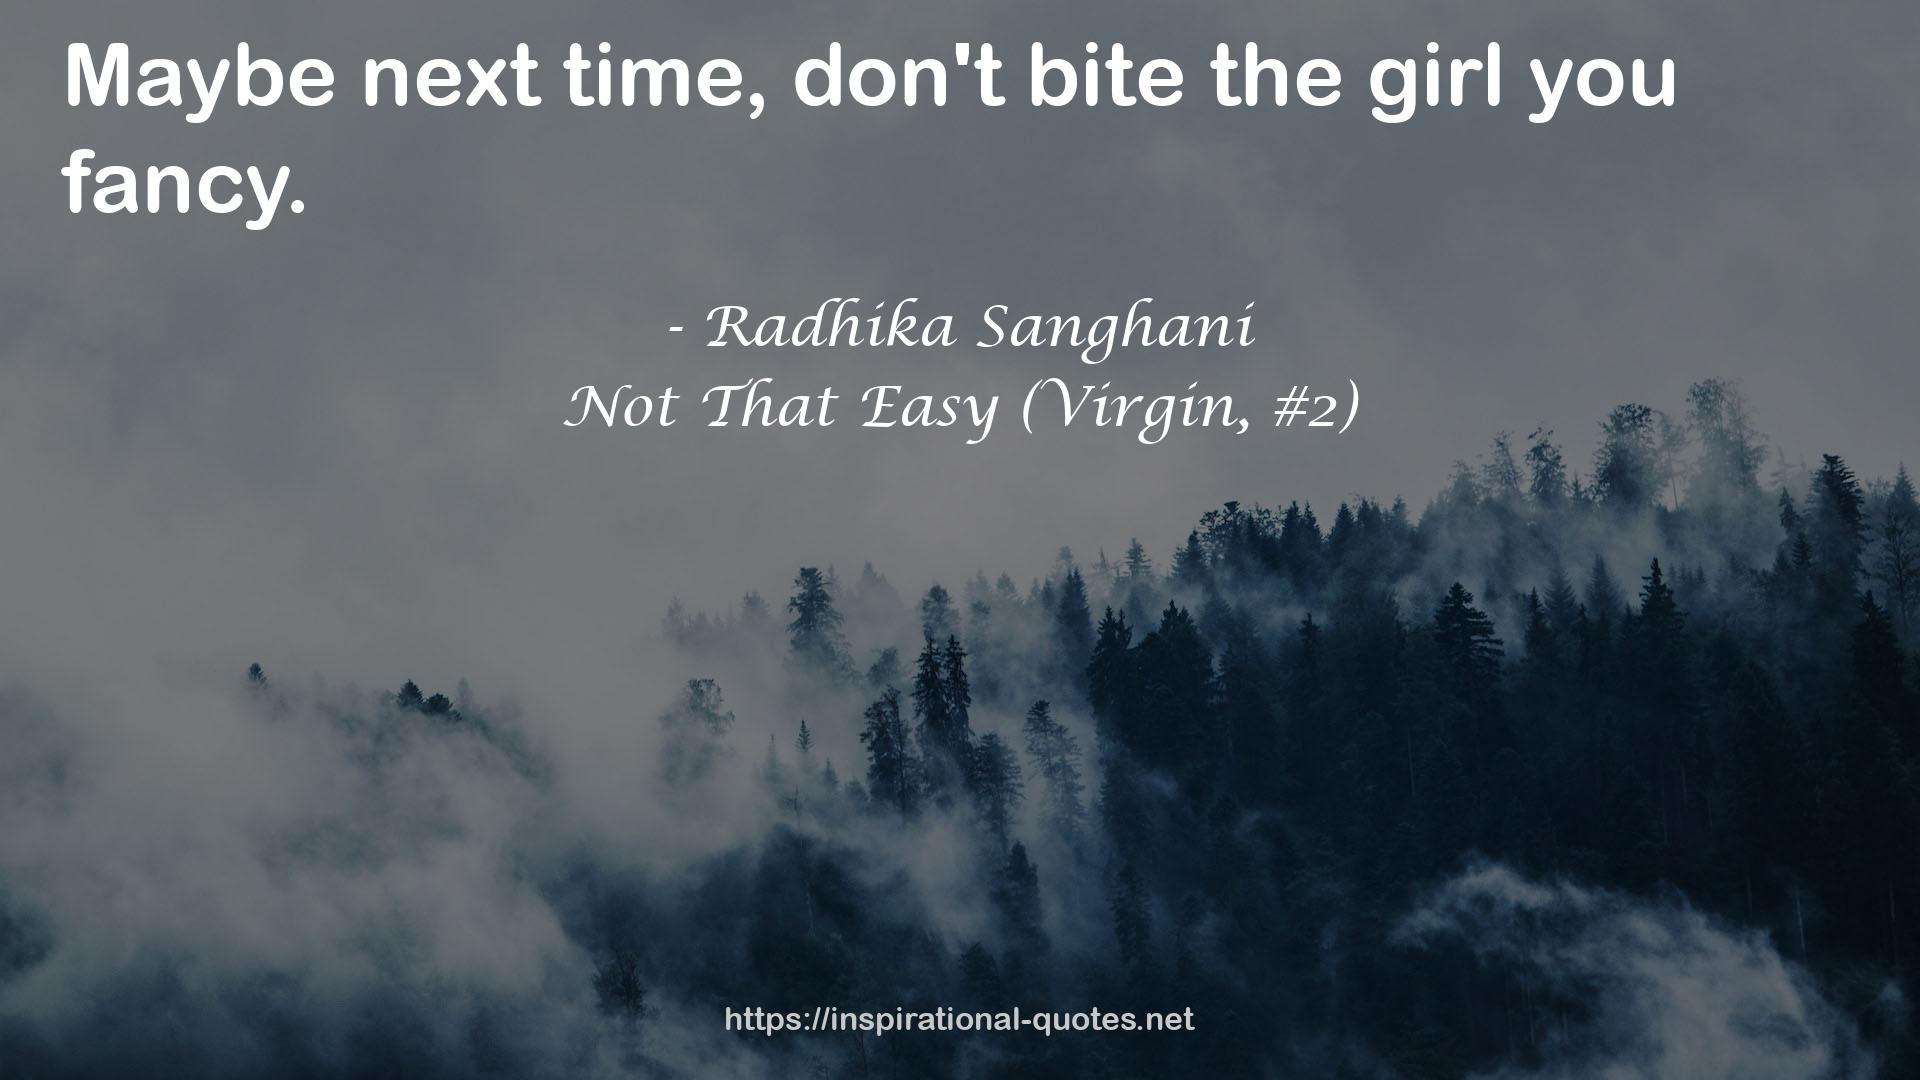 Not That Easy (Virgin, #2) QUOTES